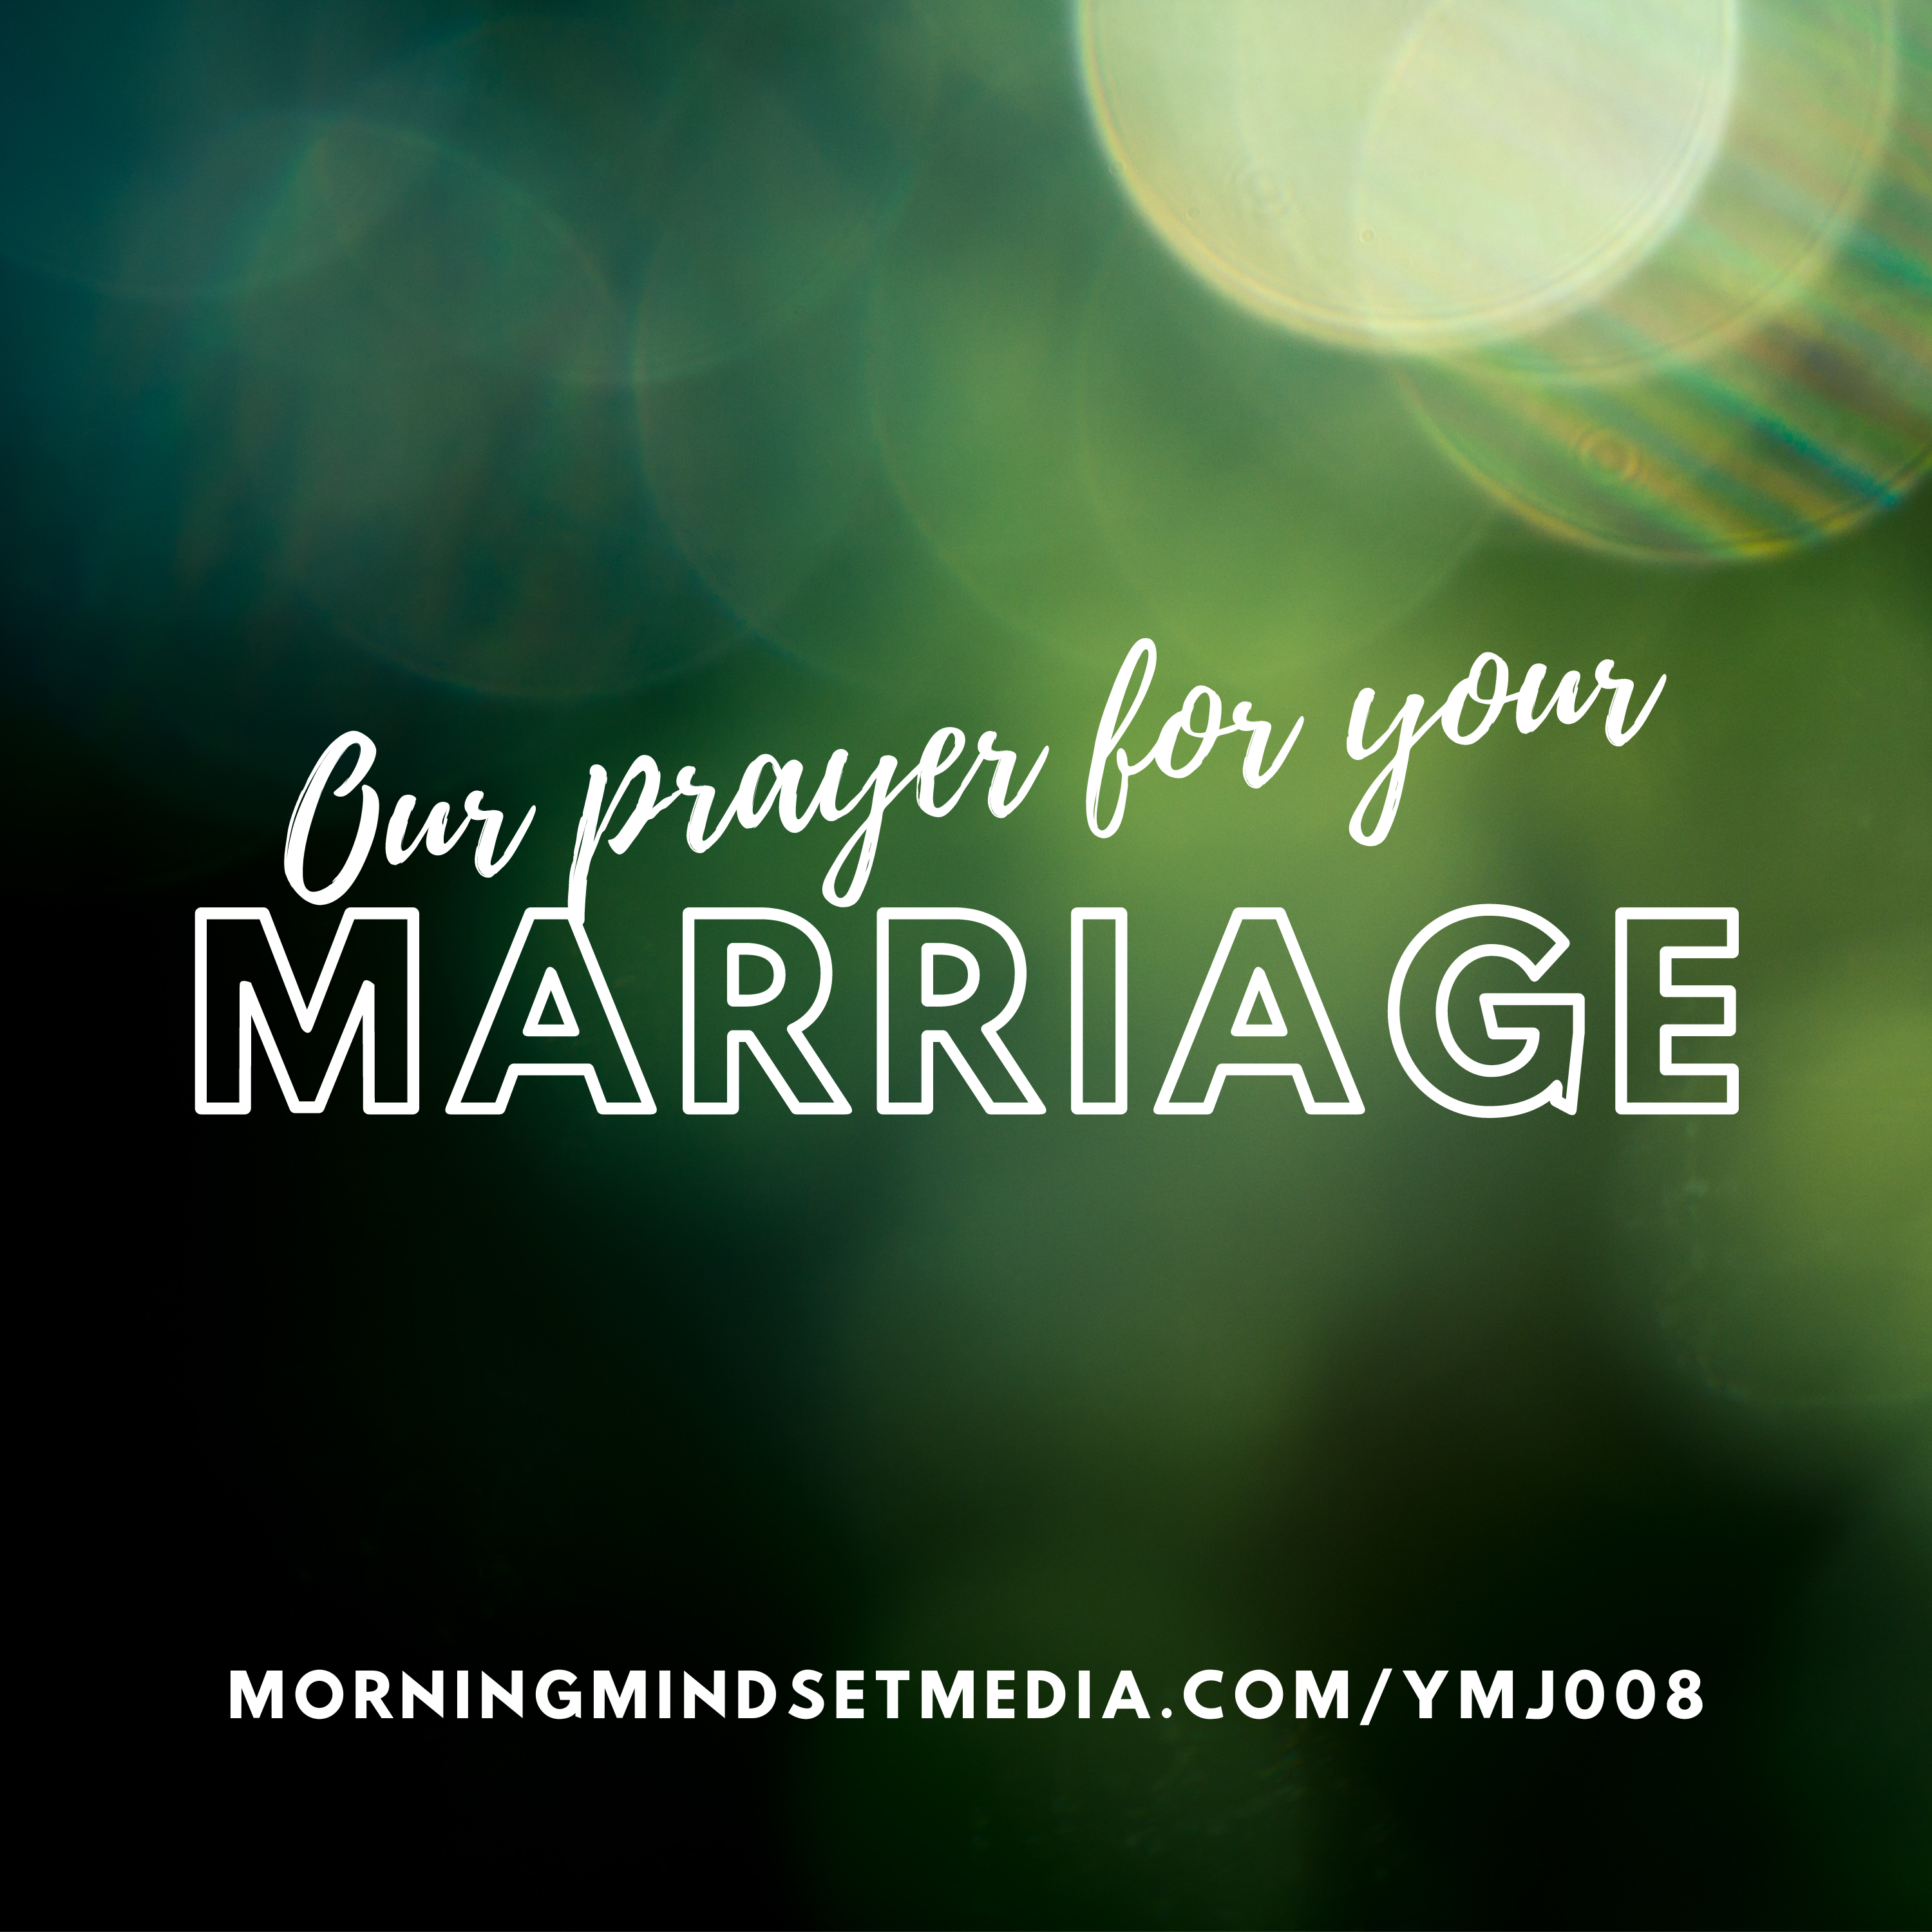 008: Our prayer for your marriage (we're really going to pray for you)